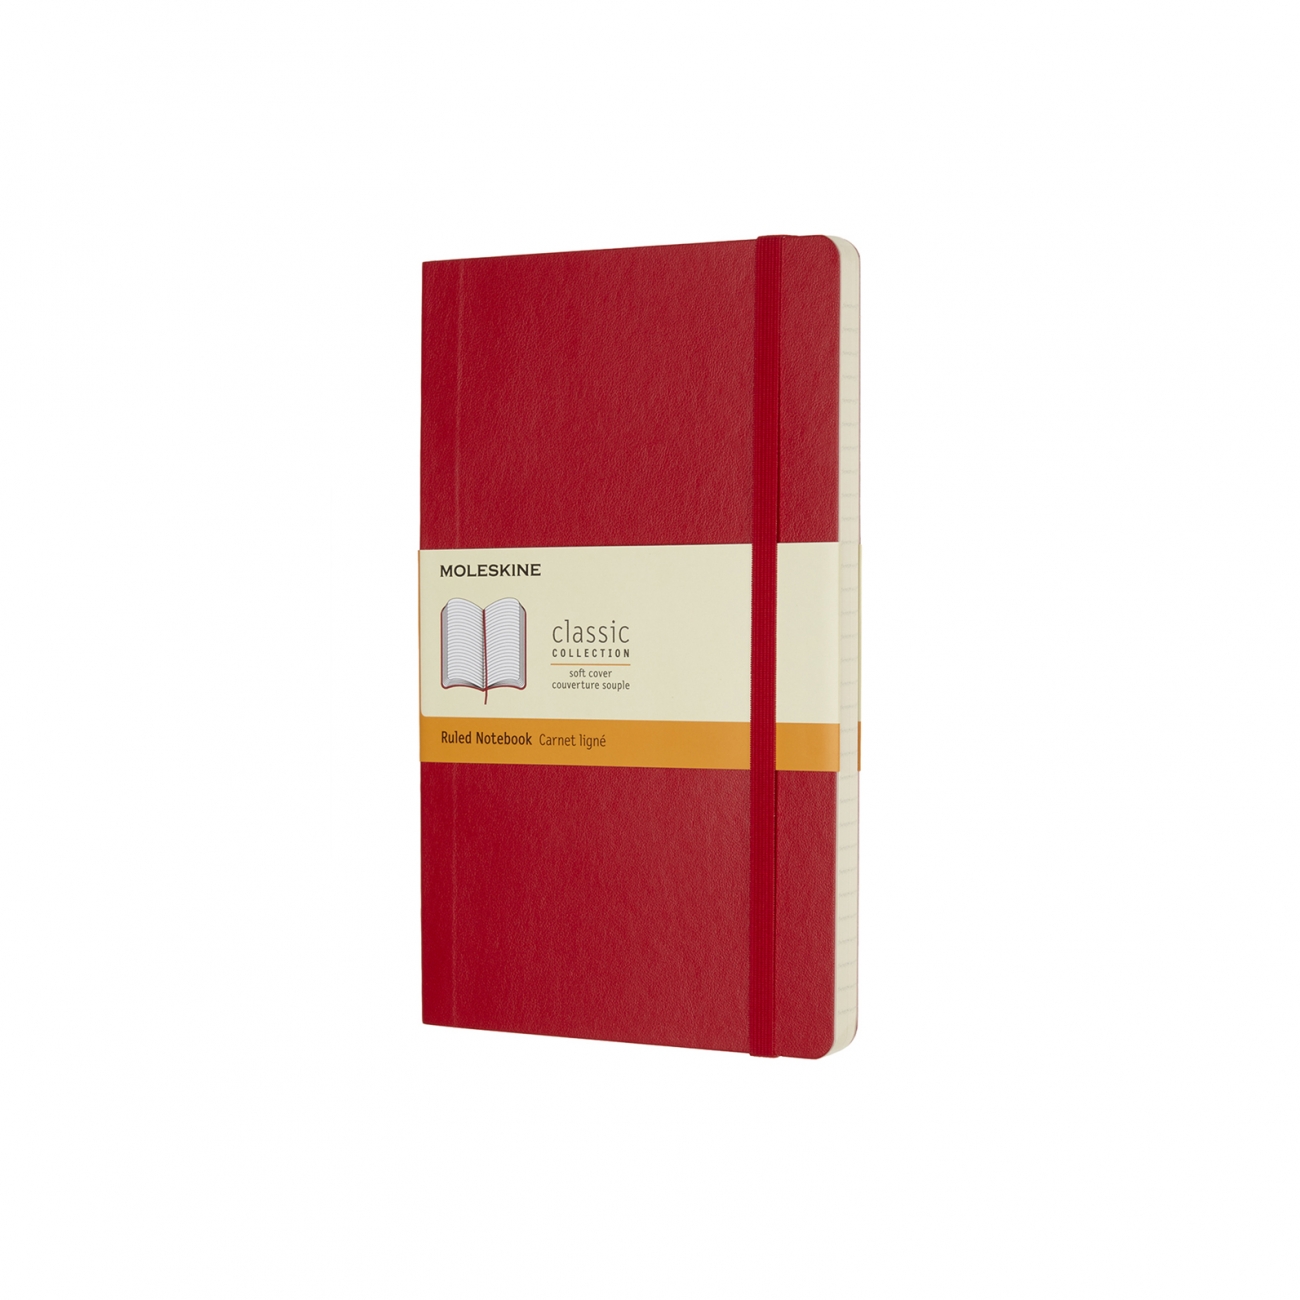 CLASSIC SOFT COVER NOTEBOOK - RULED - LARGE - SCARLET RED